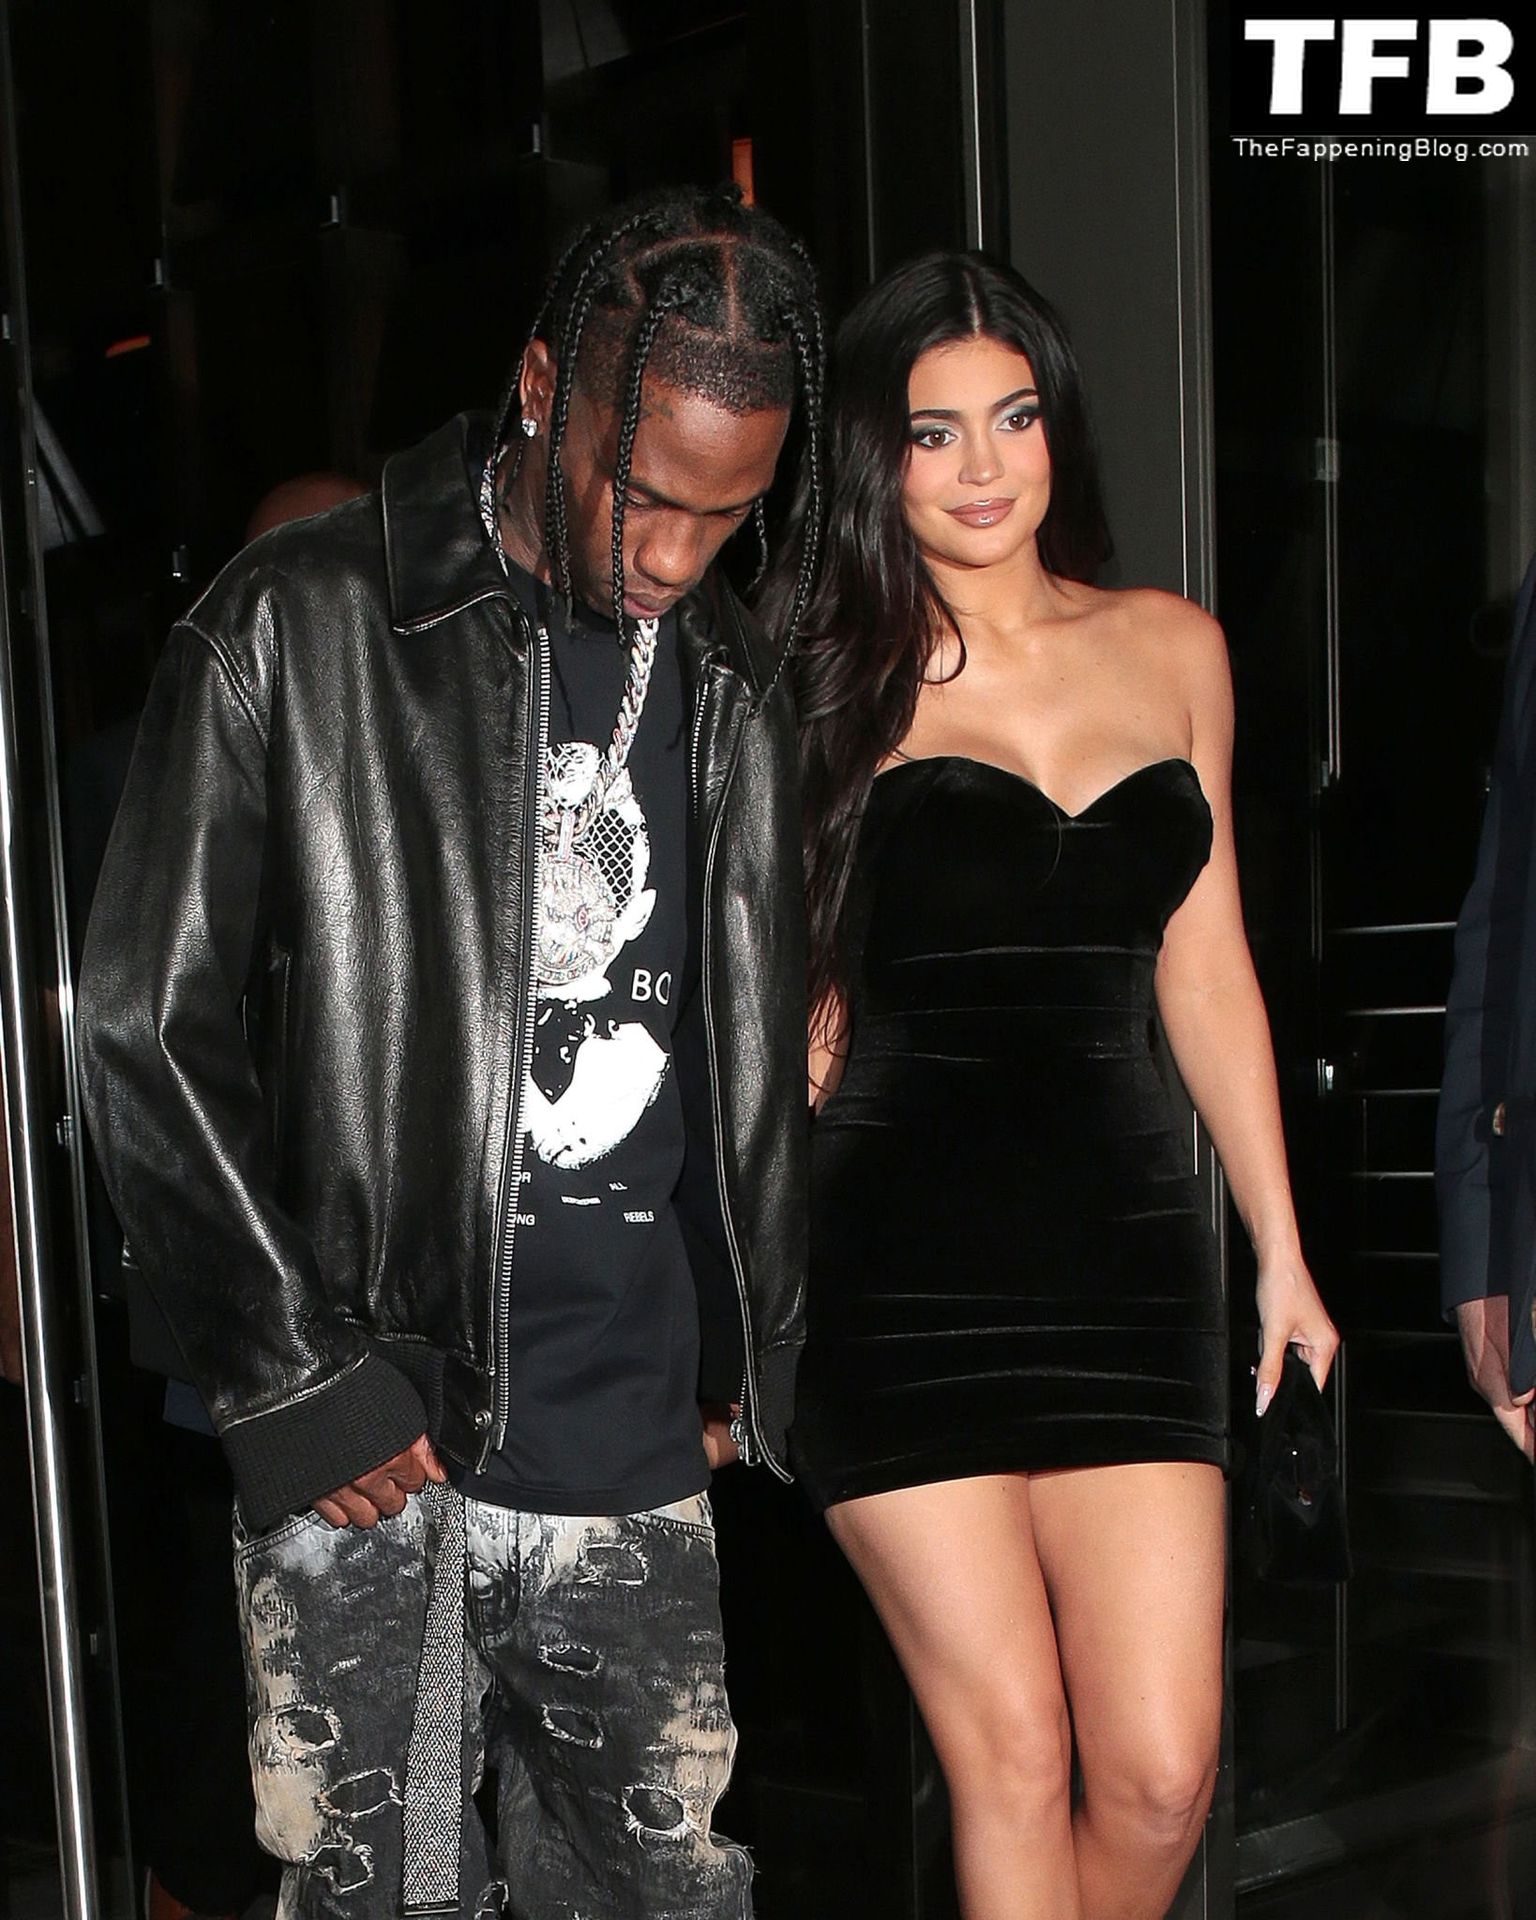 Kylie Jenner Sexy The Fappening Blog 10 - Kylie Jenner Steps Out For Dinner at Nobu London (26 Photos)